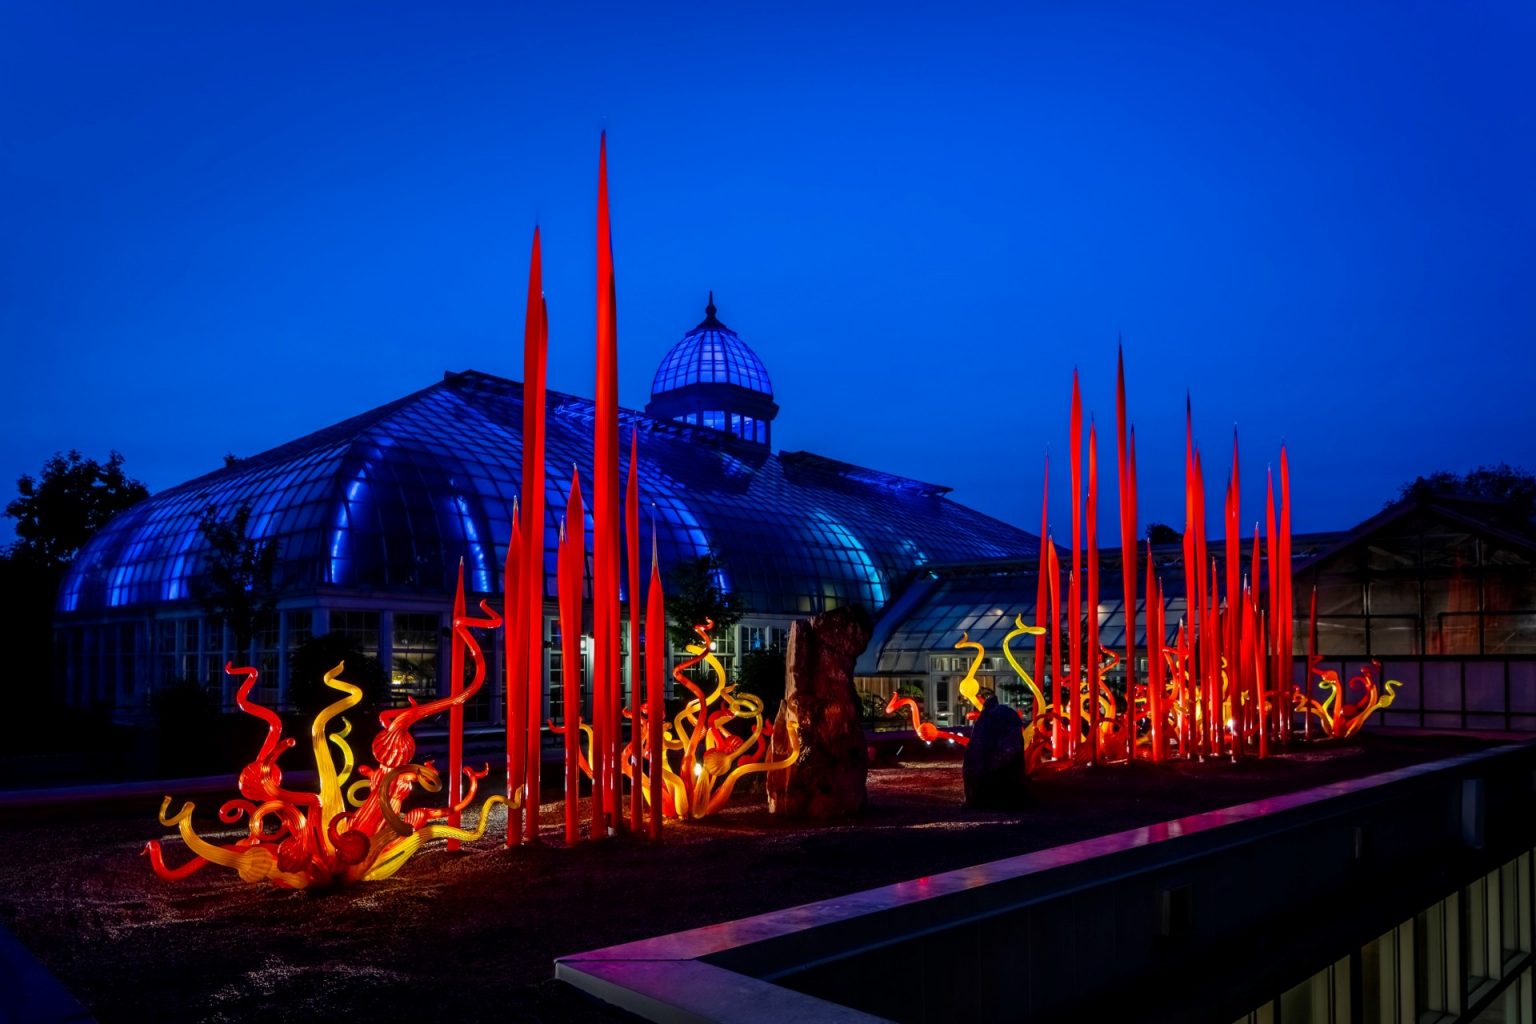 “Chihuly Nights” returns for select weekends during 2021 614NOW